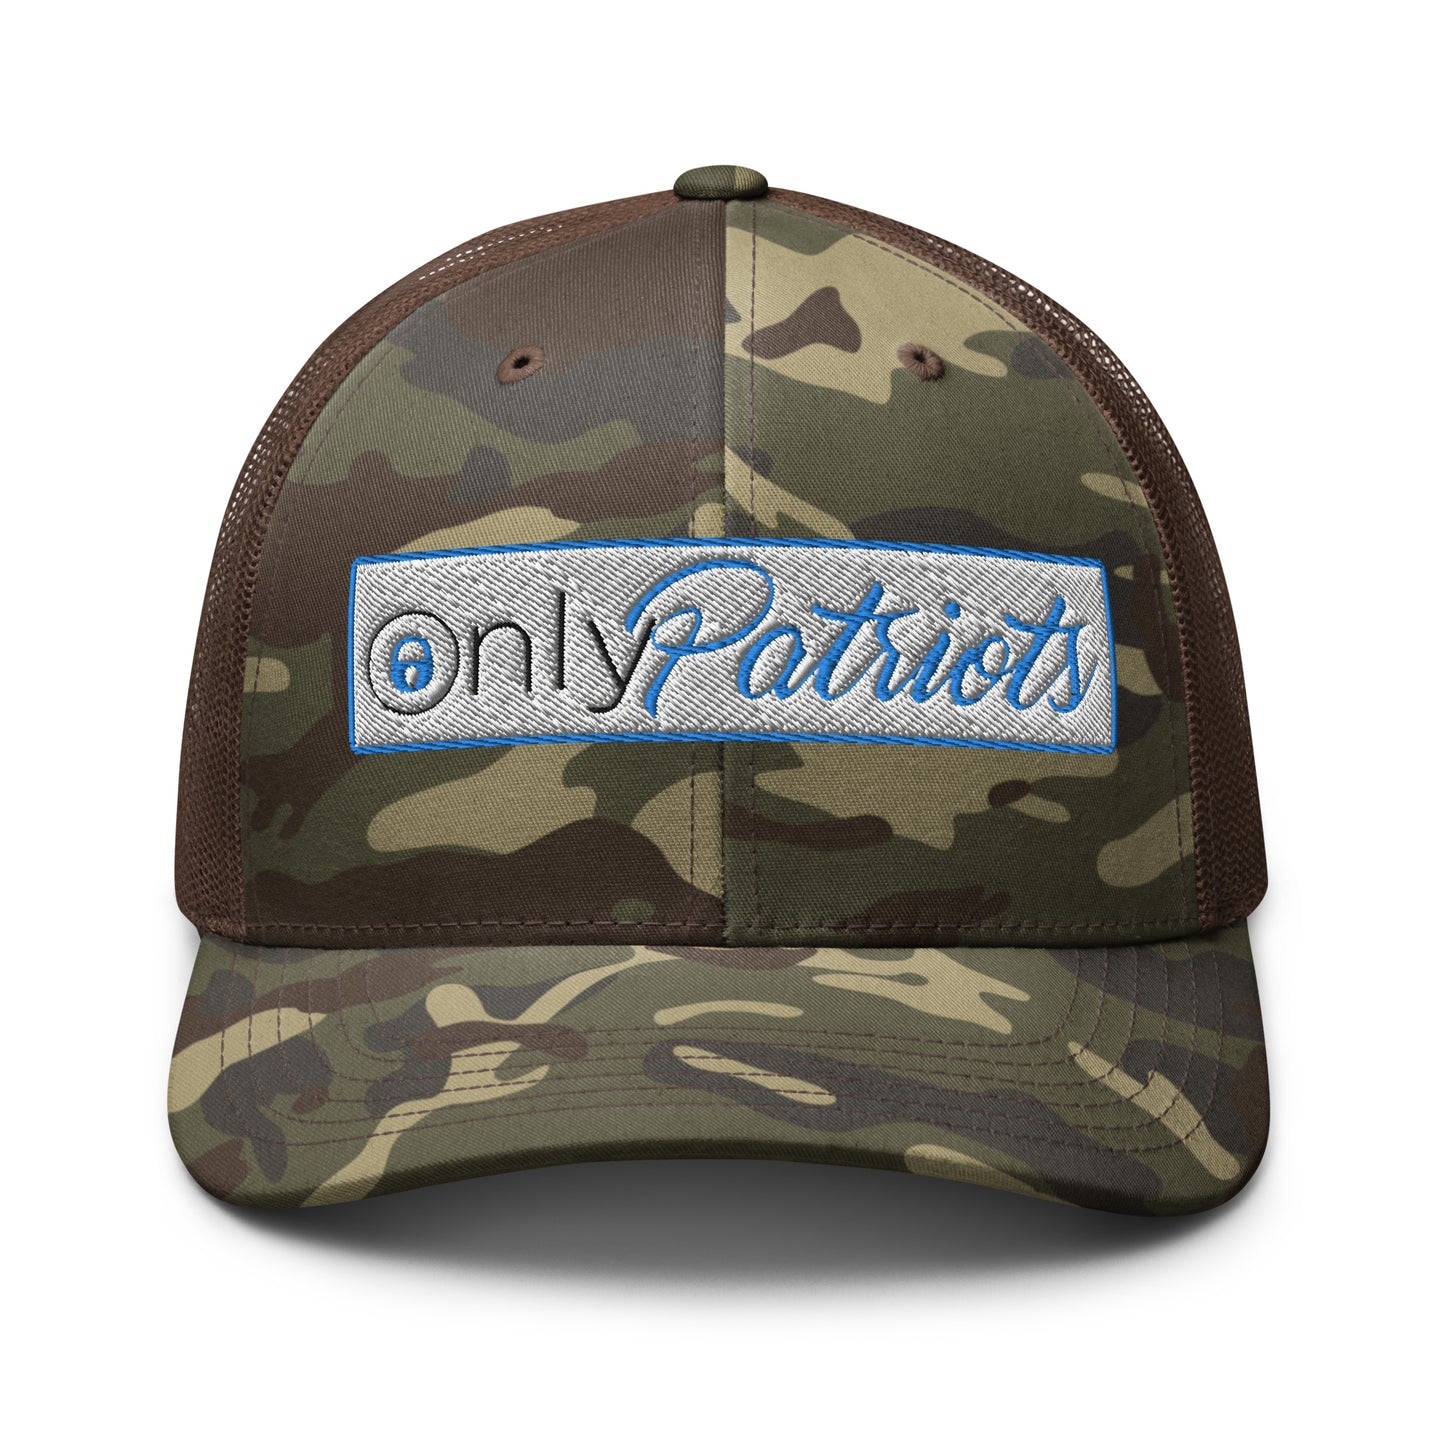 Only Patriots Camouflage trucker hat